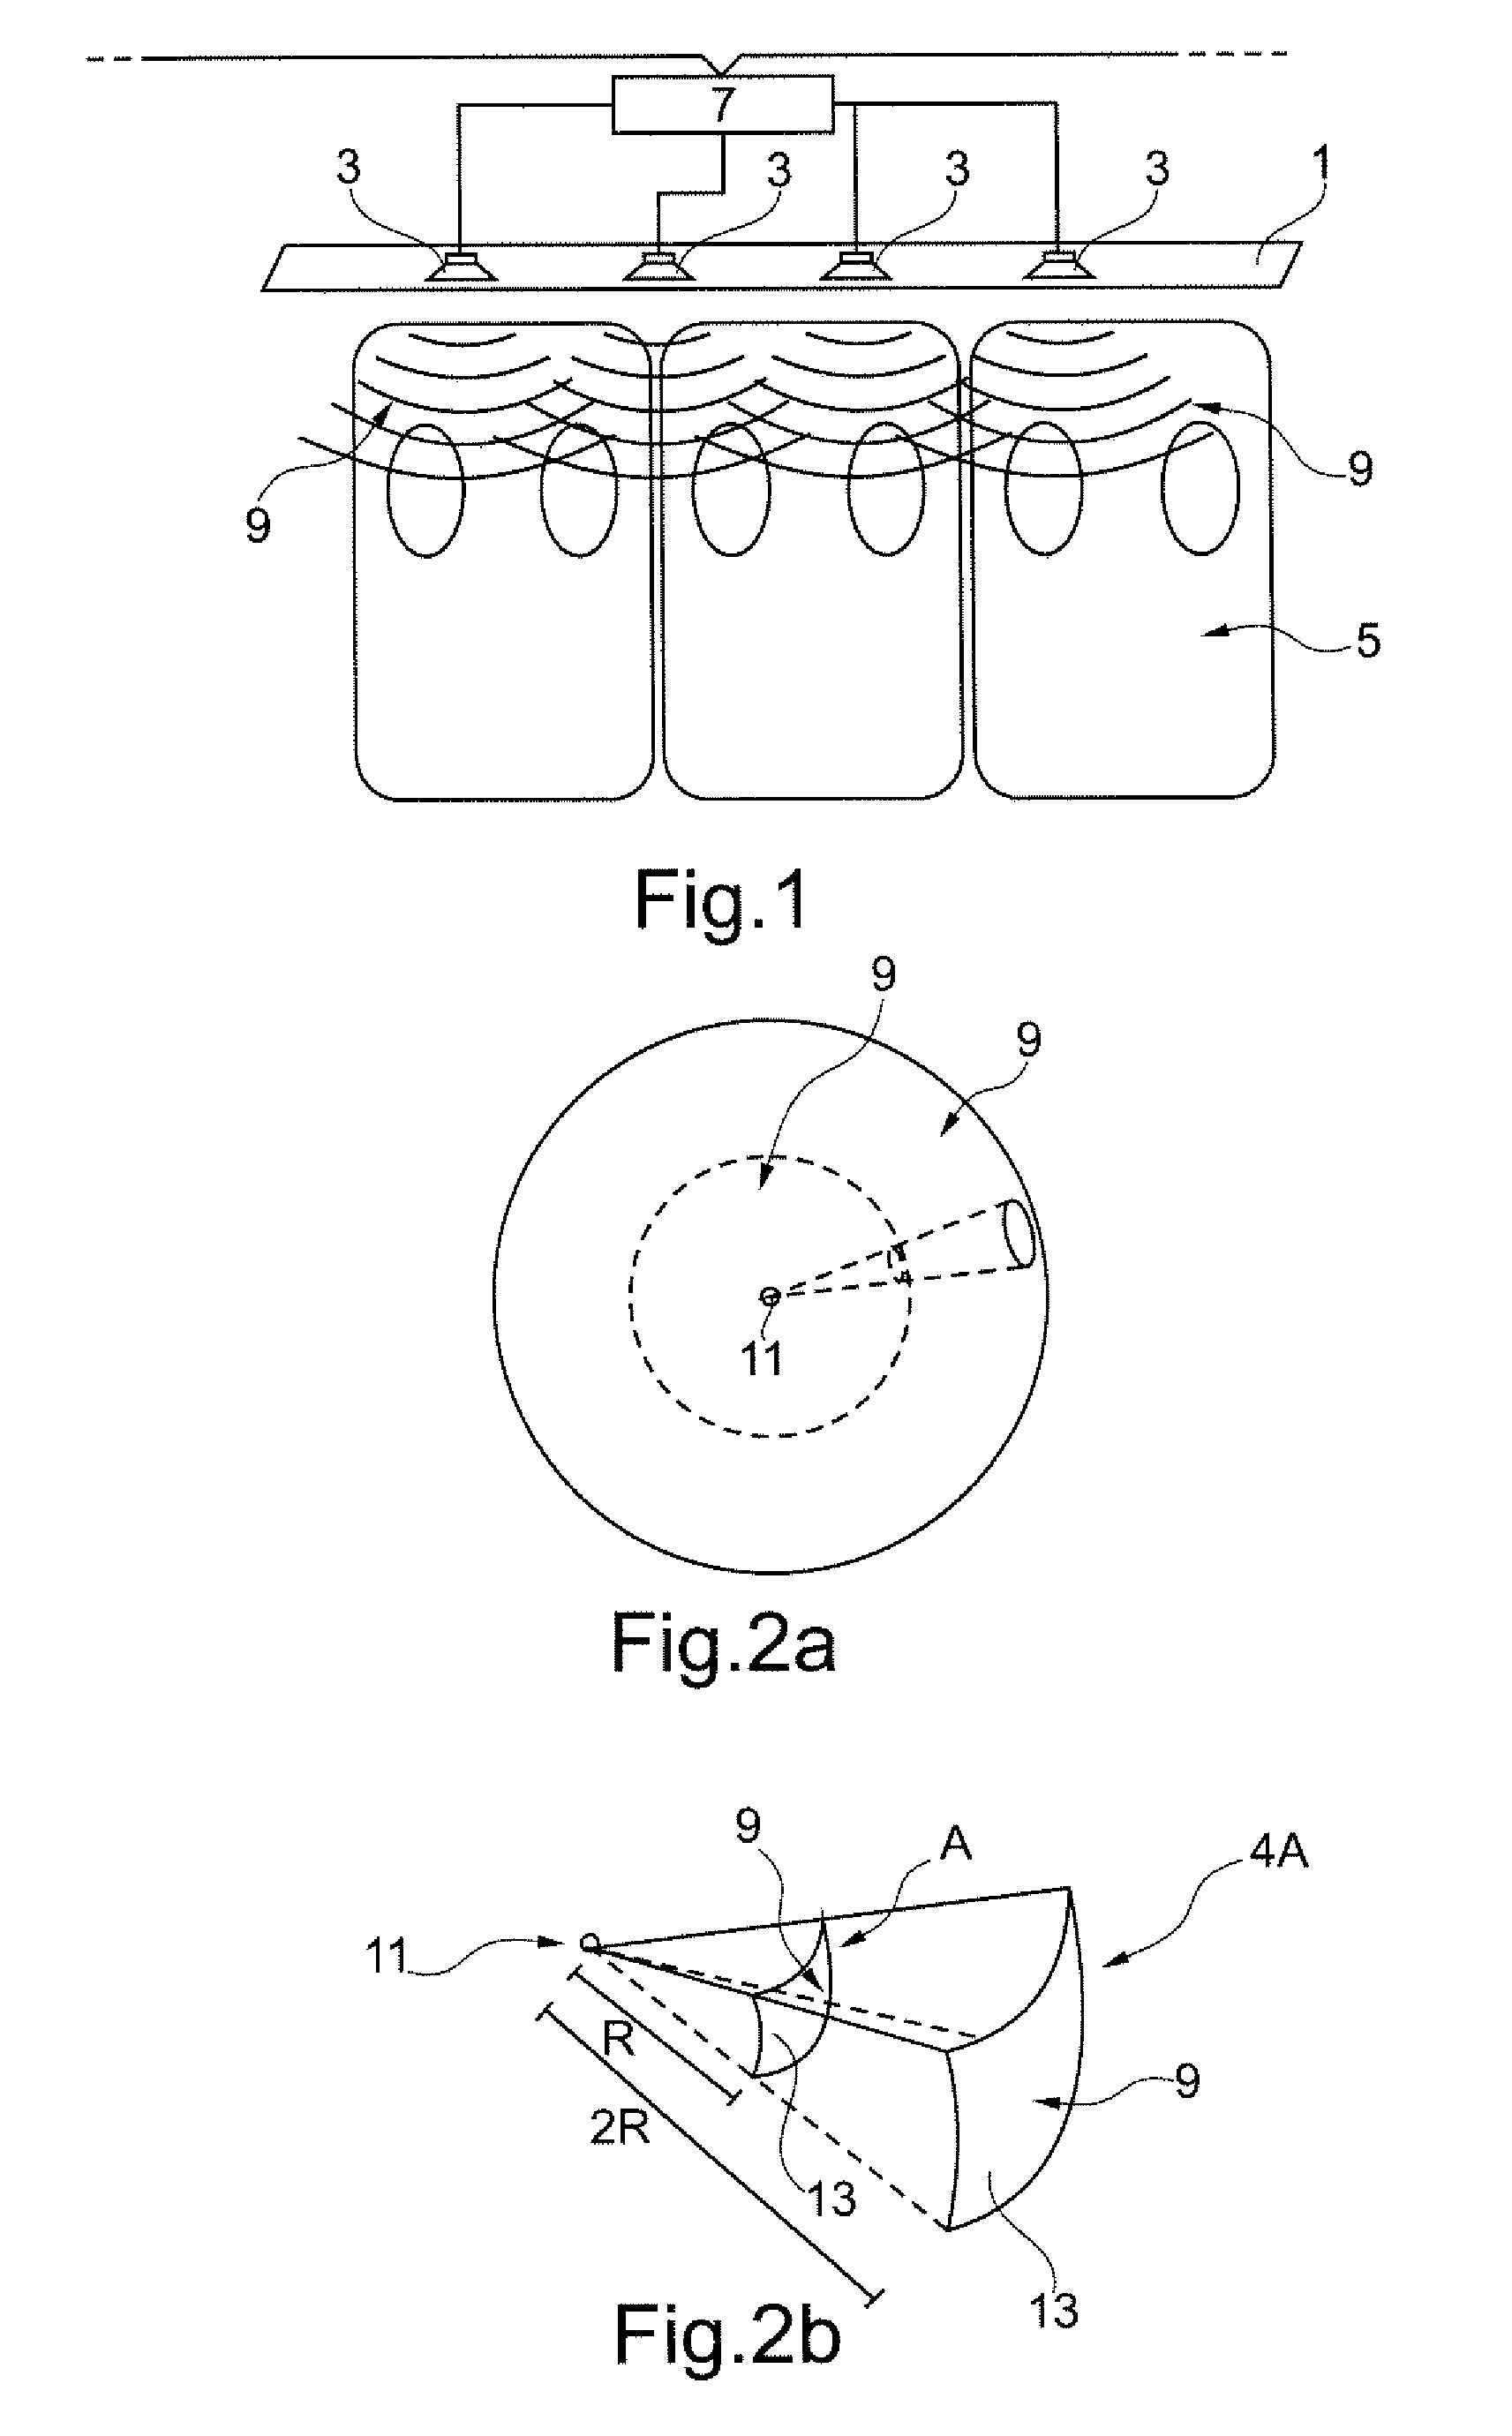 Modification of audio signals for distribution in a room